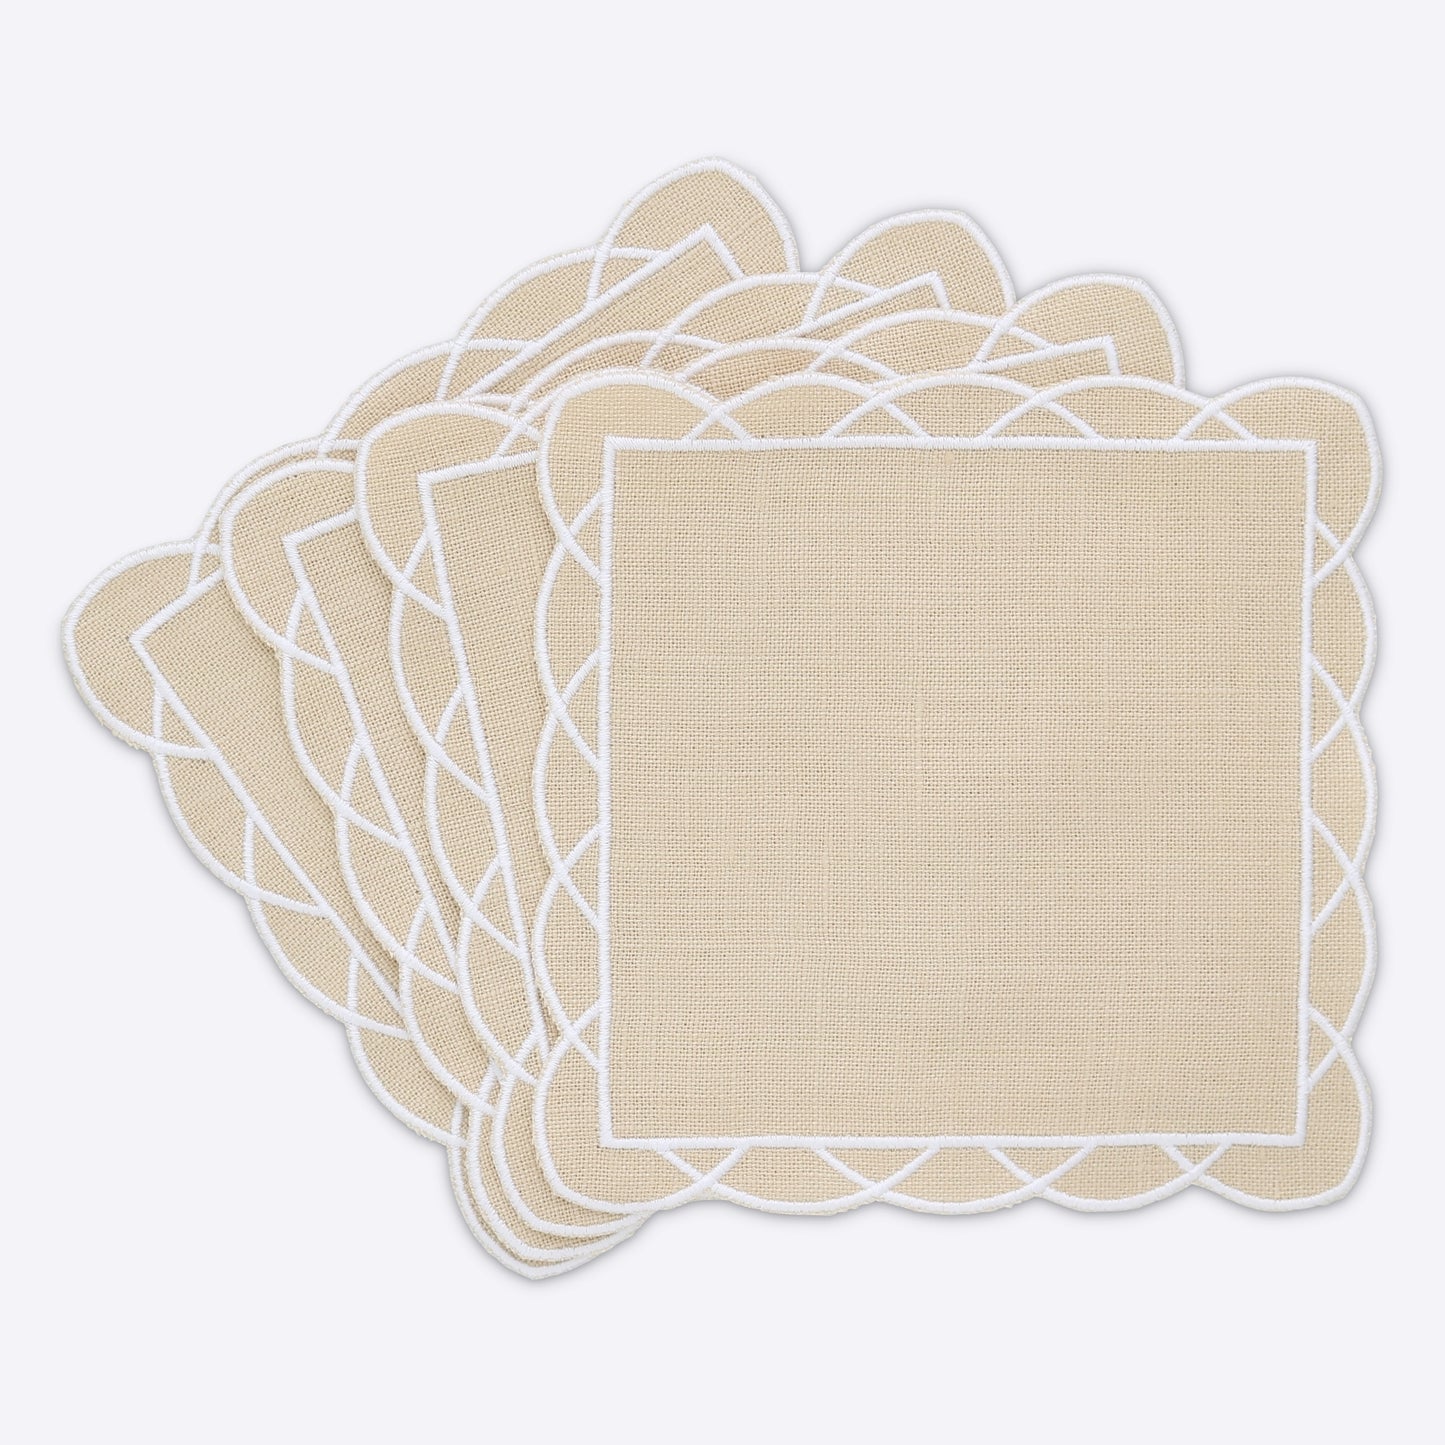 Made to order Daisy Overlaped Scallops Linen Cocktail Napkins (set of 4)